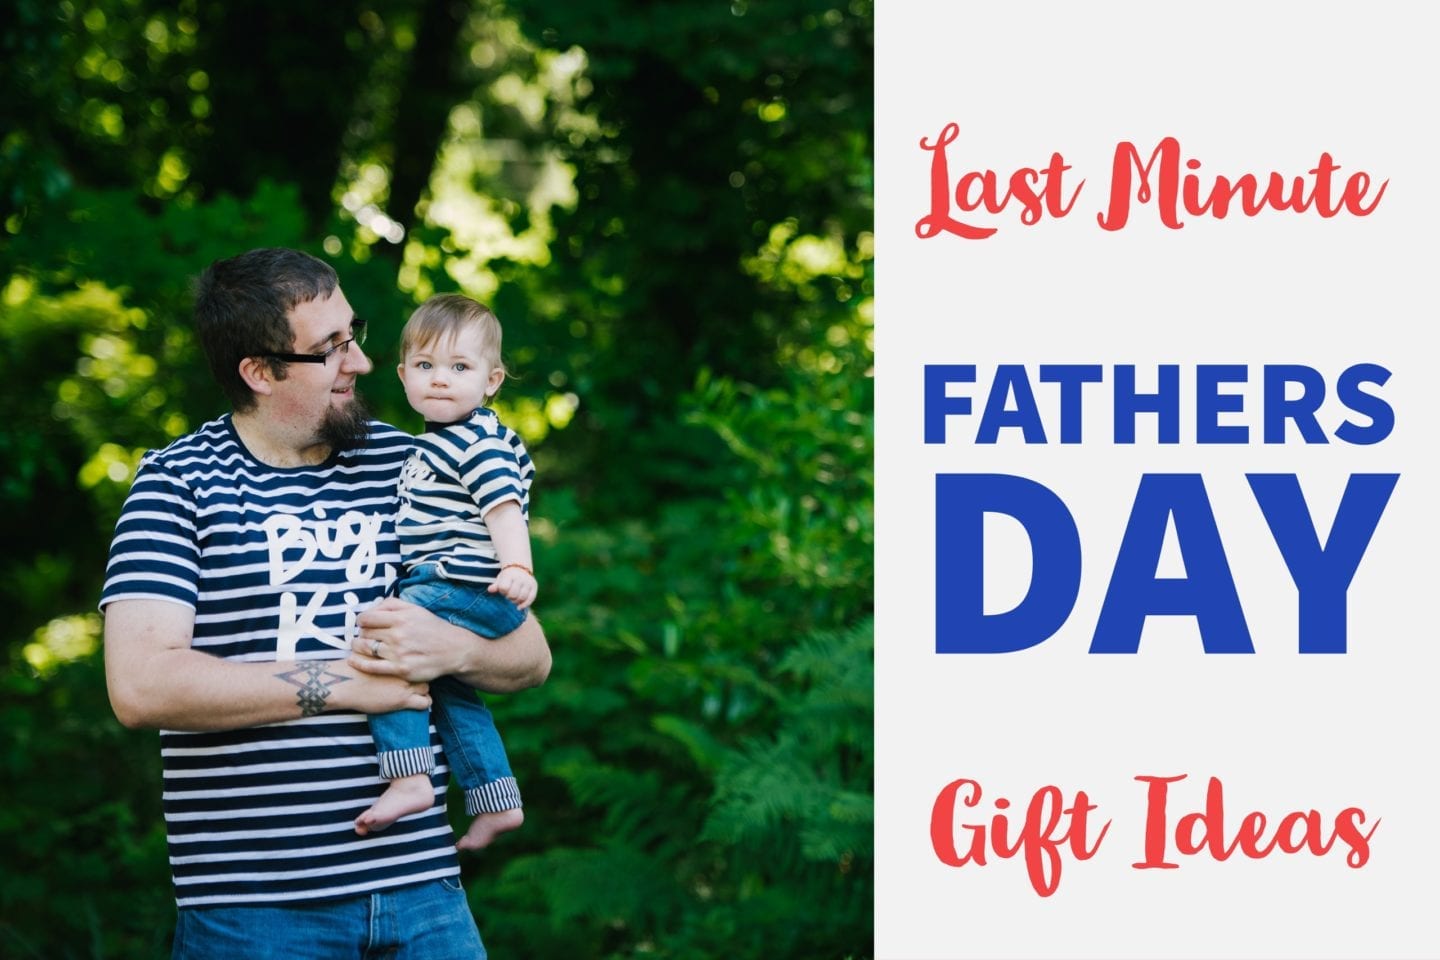 Last Minute Fathers Day Gifts! – It’s not to late to order these items!!